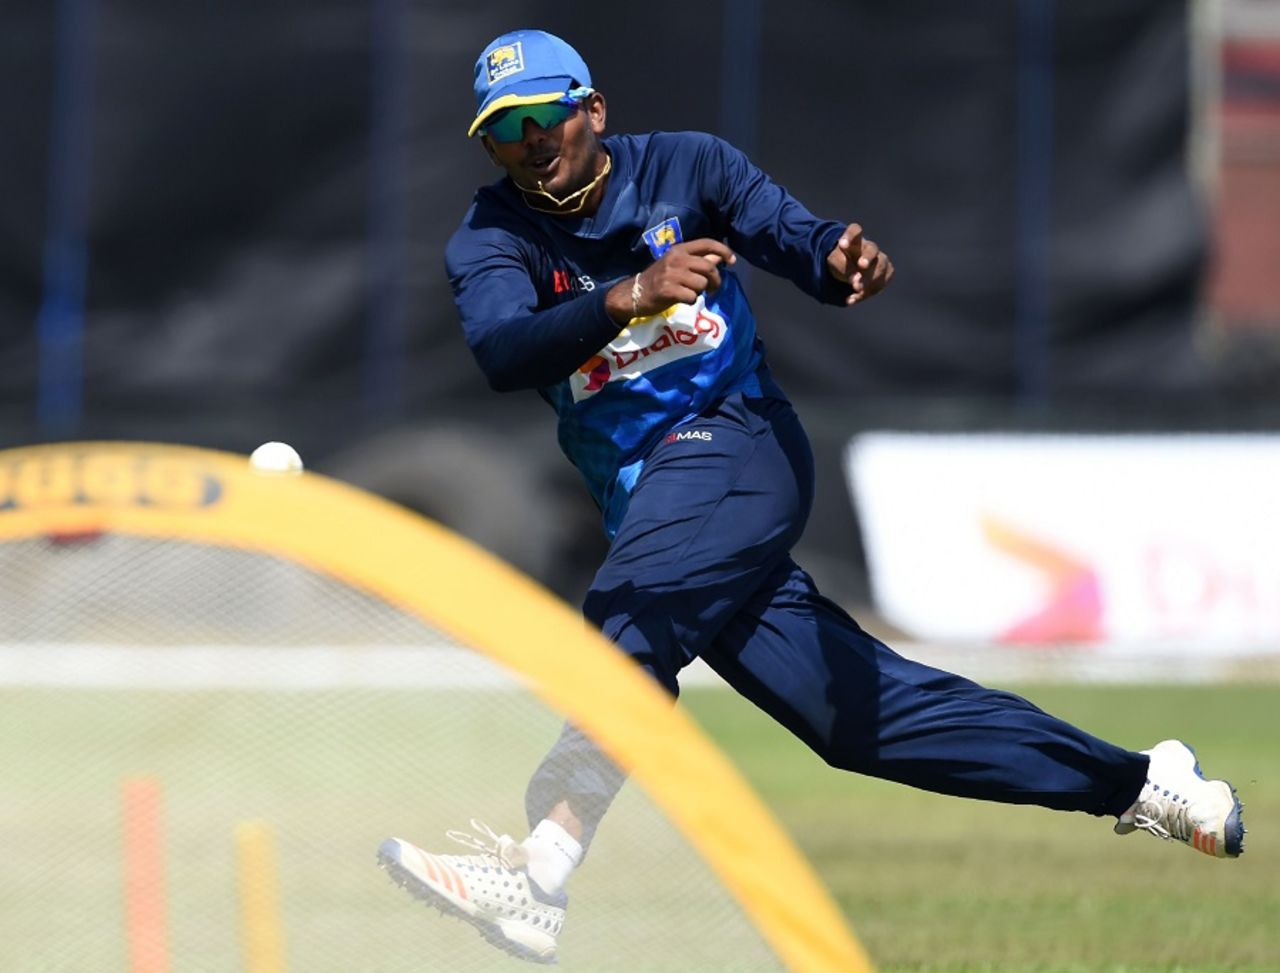 Wanidu Hasaranga takes part in a fielding drill, Galle, June 29, 2017